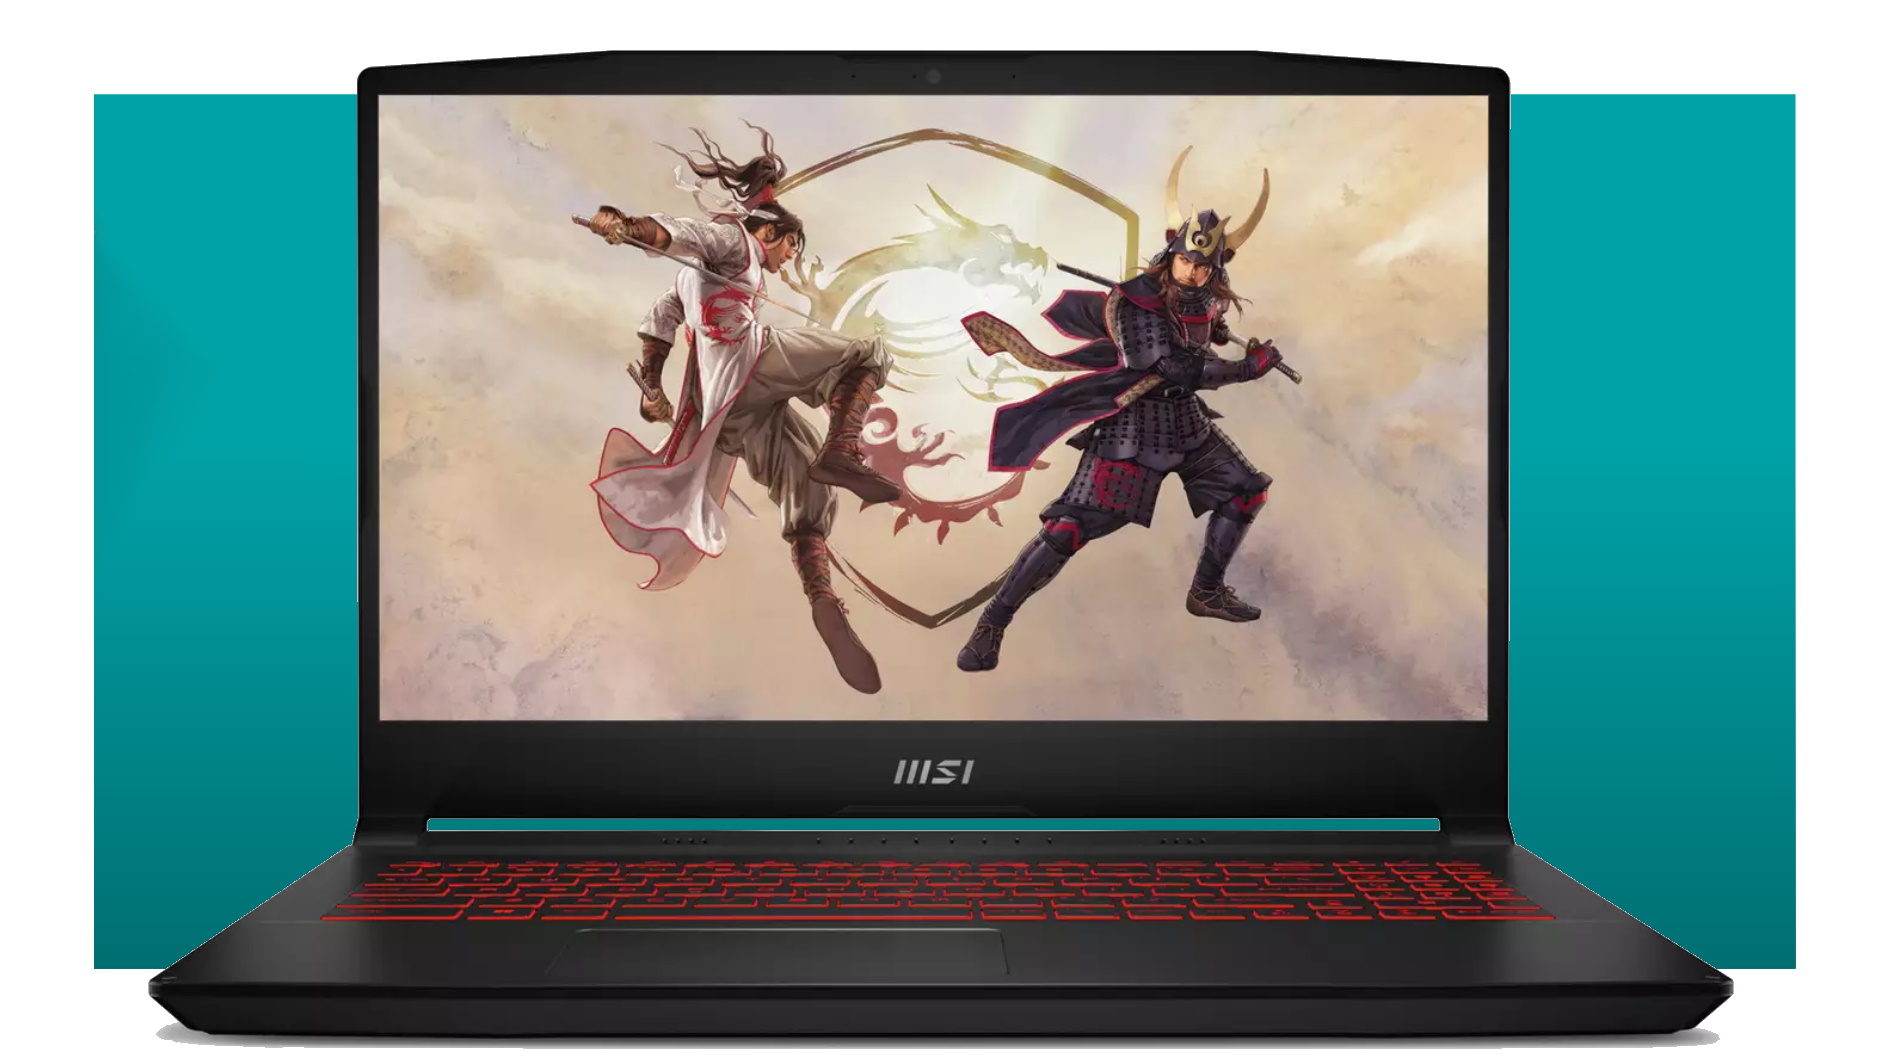  Get this RTX 3060 gaming laptop for just £720 right now 